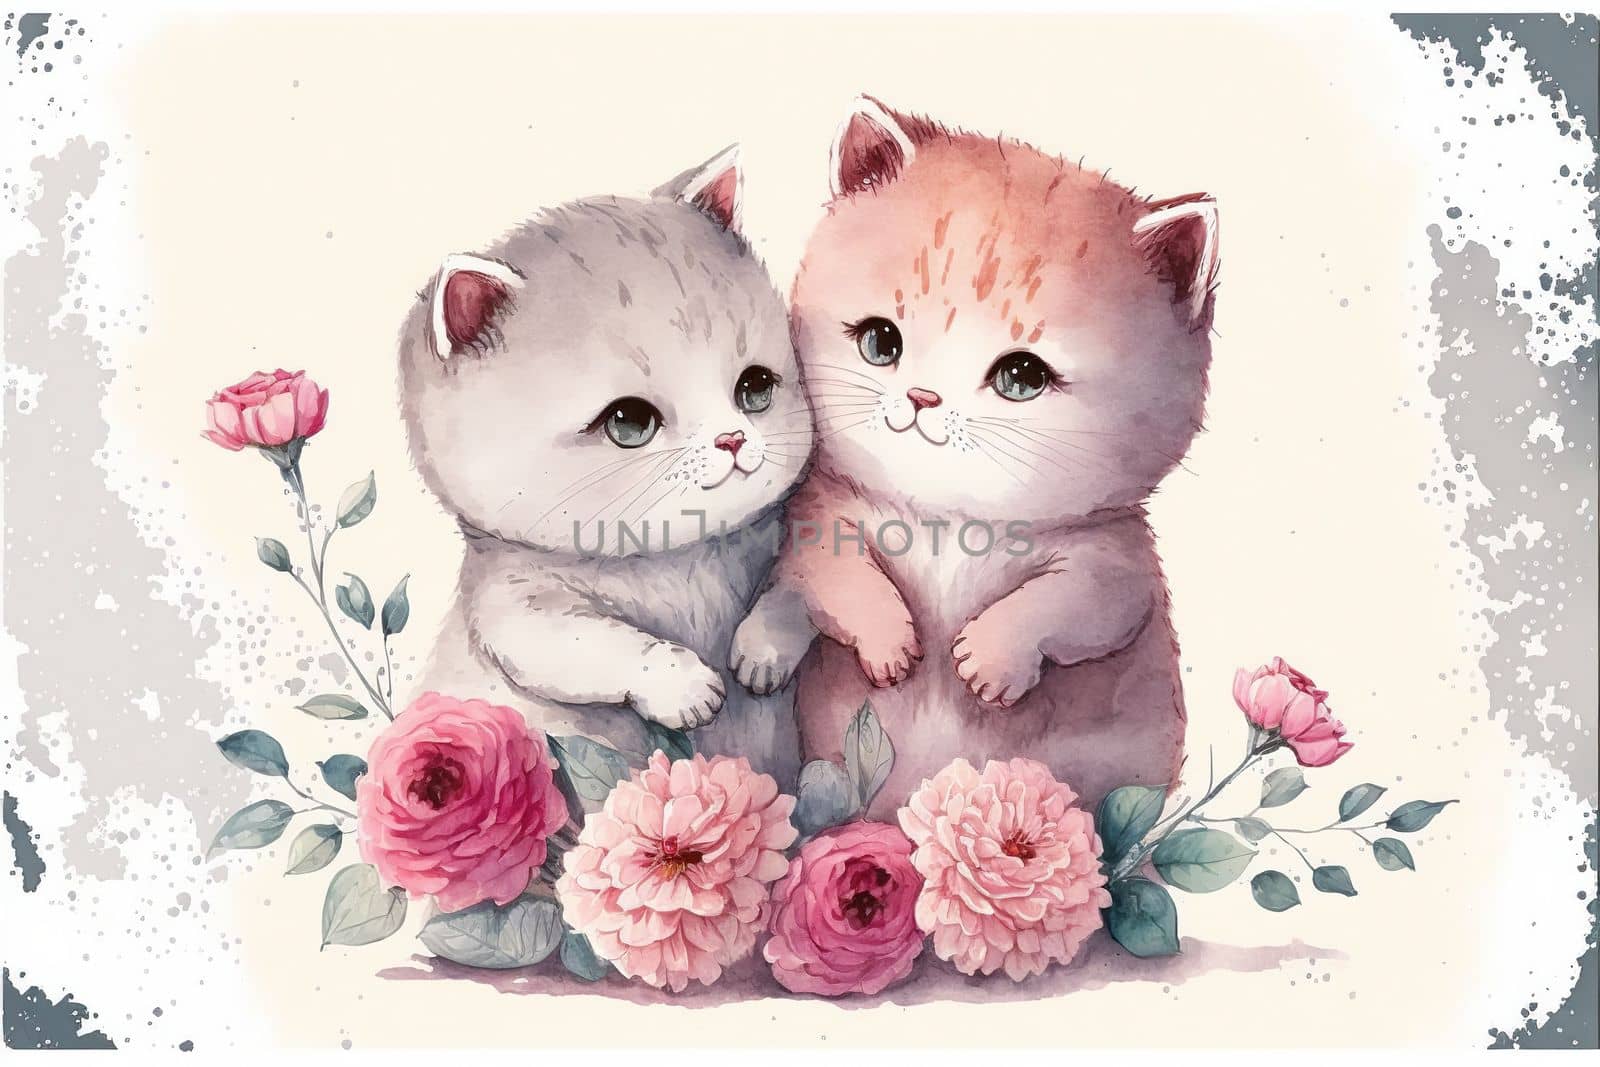 Cute little kitten in love on romantic Valentine's day hand drawn cartoon style by biancoblue